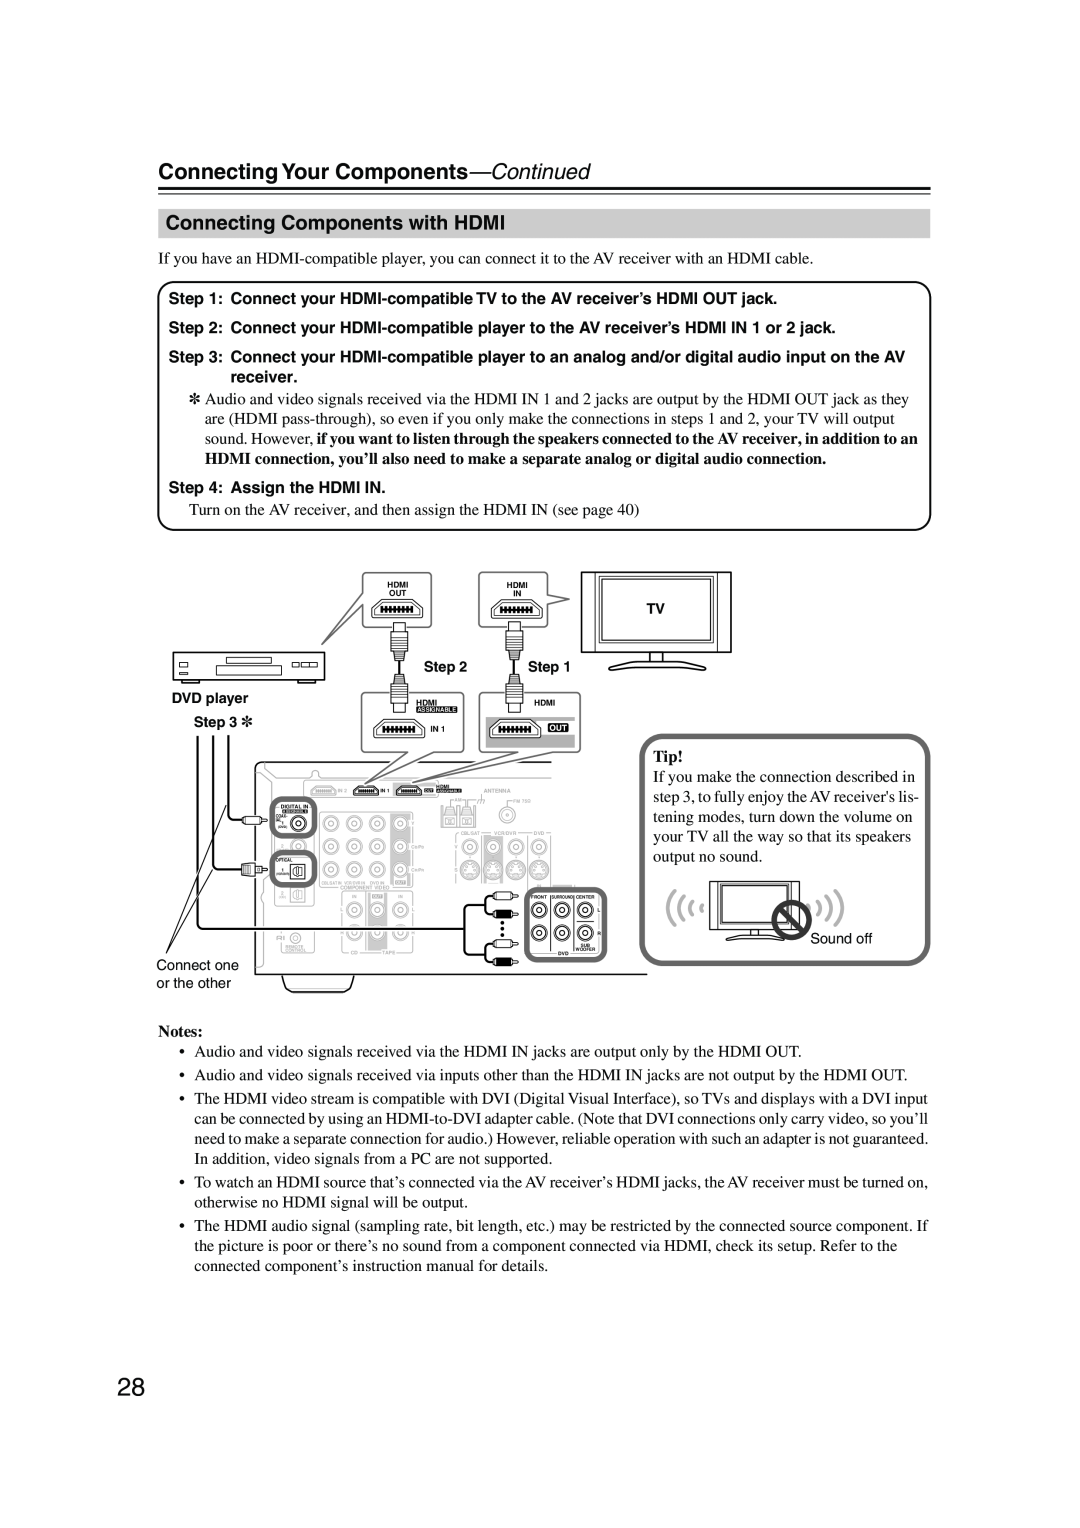 Onkyo HT-SP904 instruction manual Connecting Components with HDMI, Connecting Your Components—Continued, Notes 